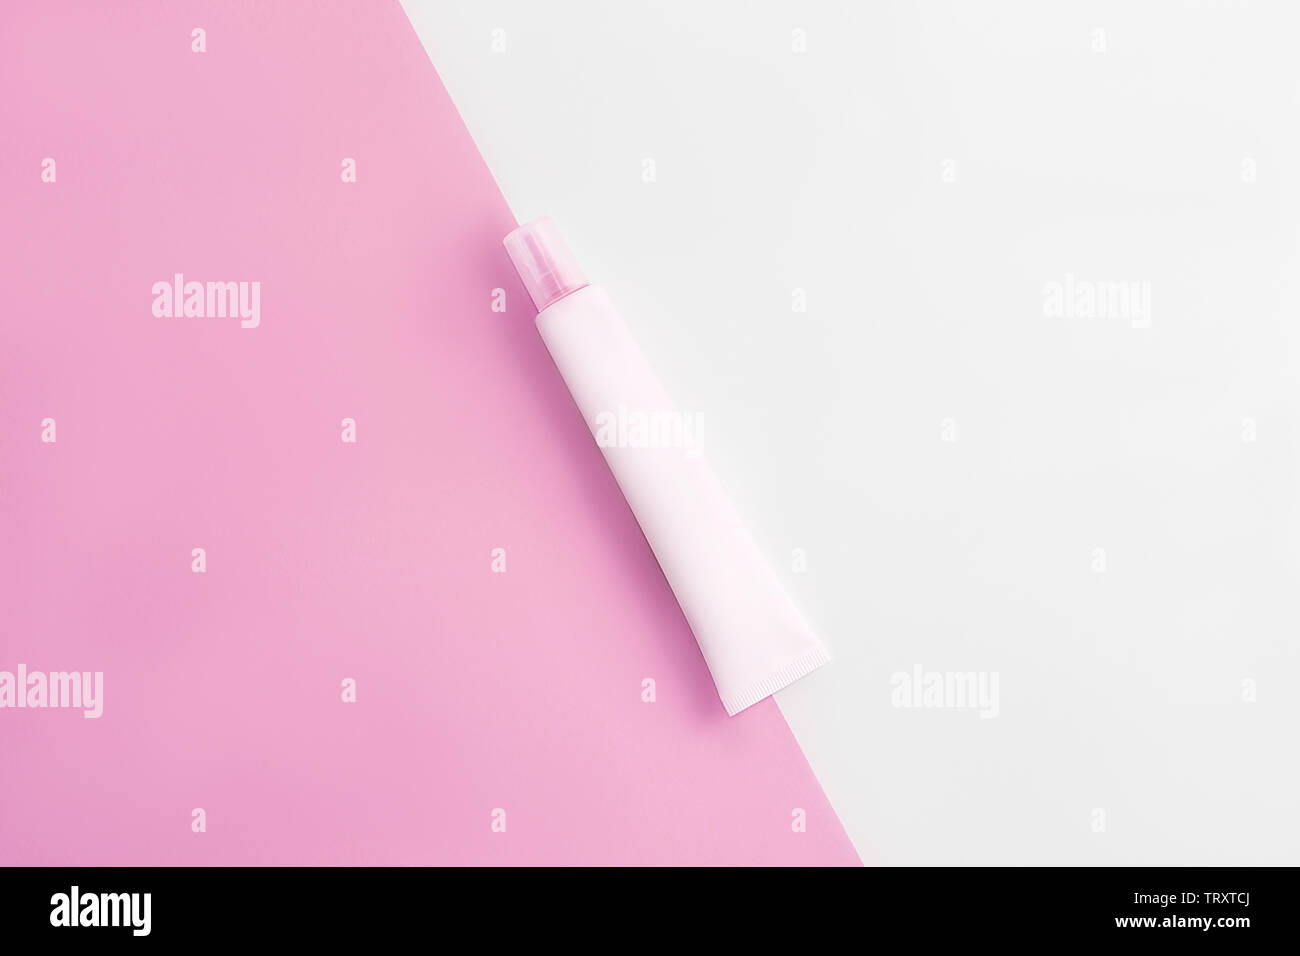 Cosmetics tube on pastel pink and white background. Copy space. Flat lay. Beauty industry concept. Stock Photo